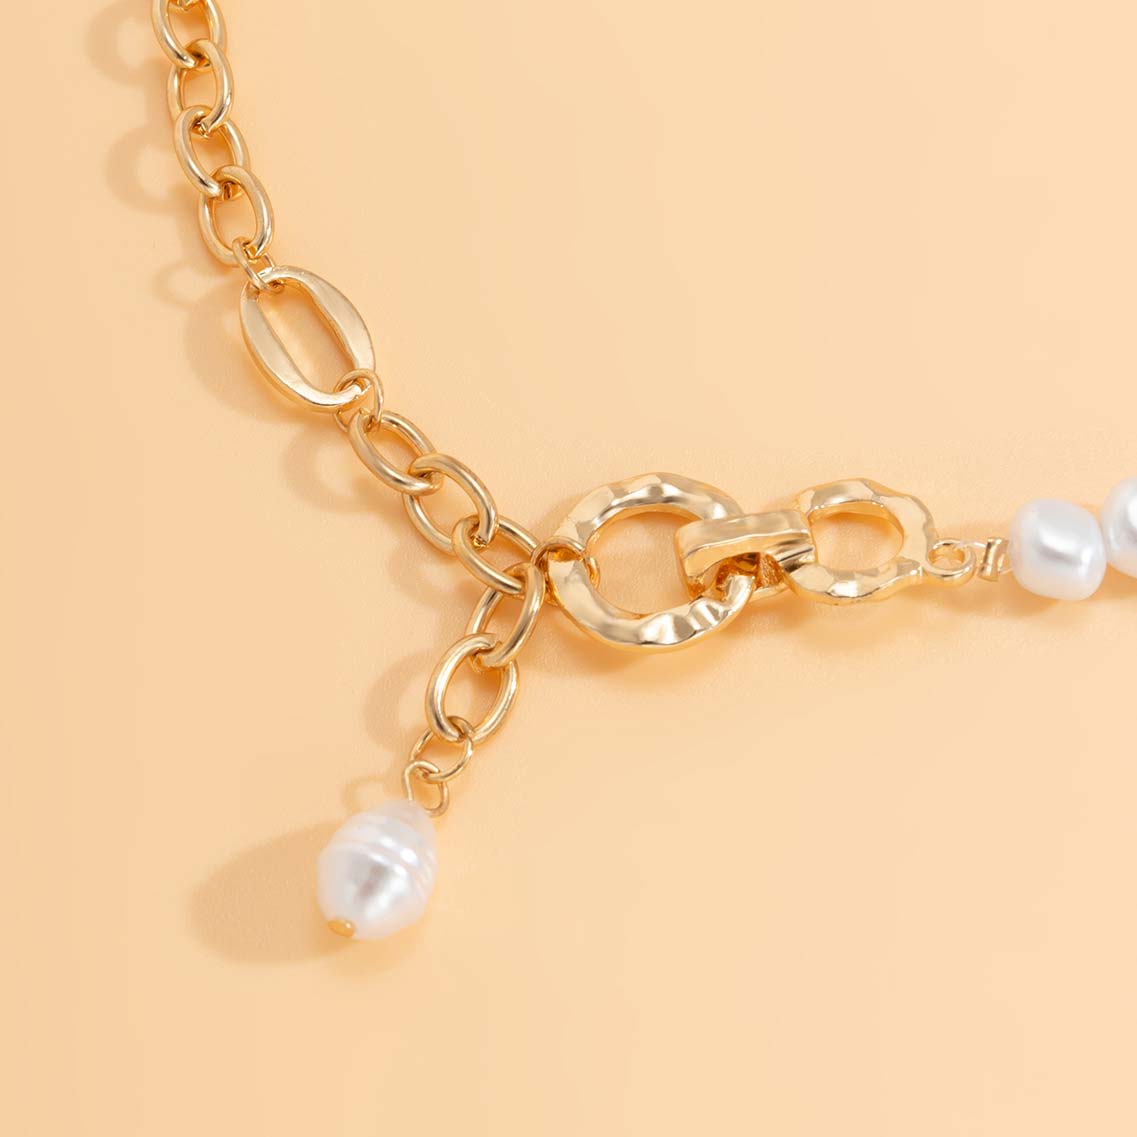 Golden Metal Chain Pearl Design Necklace